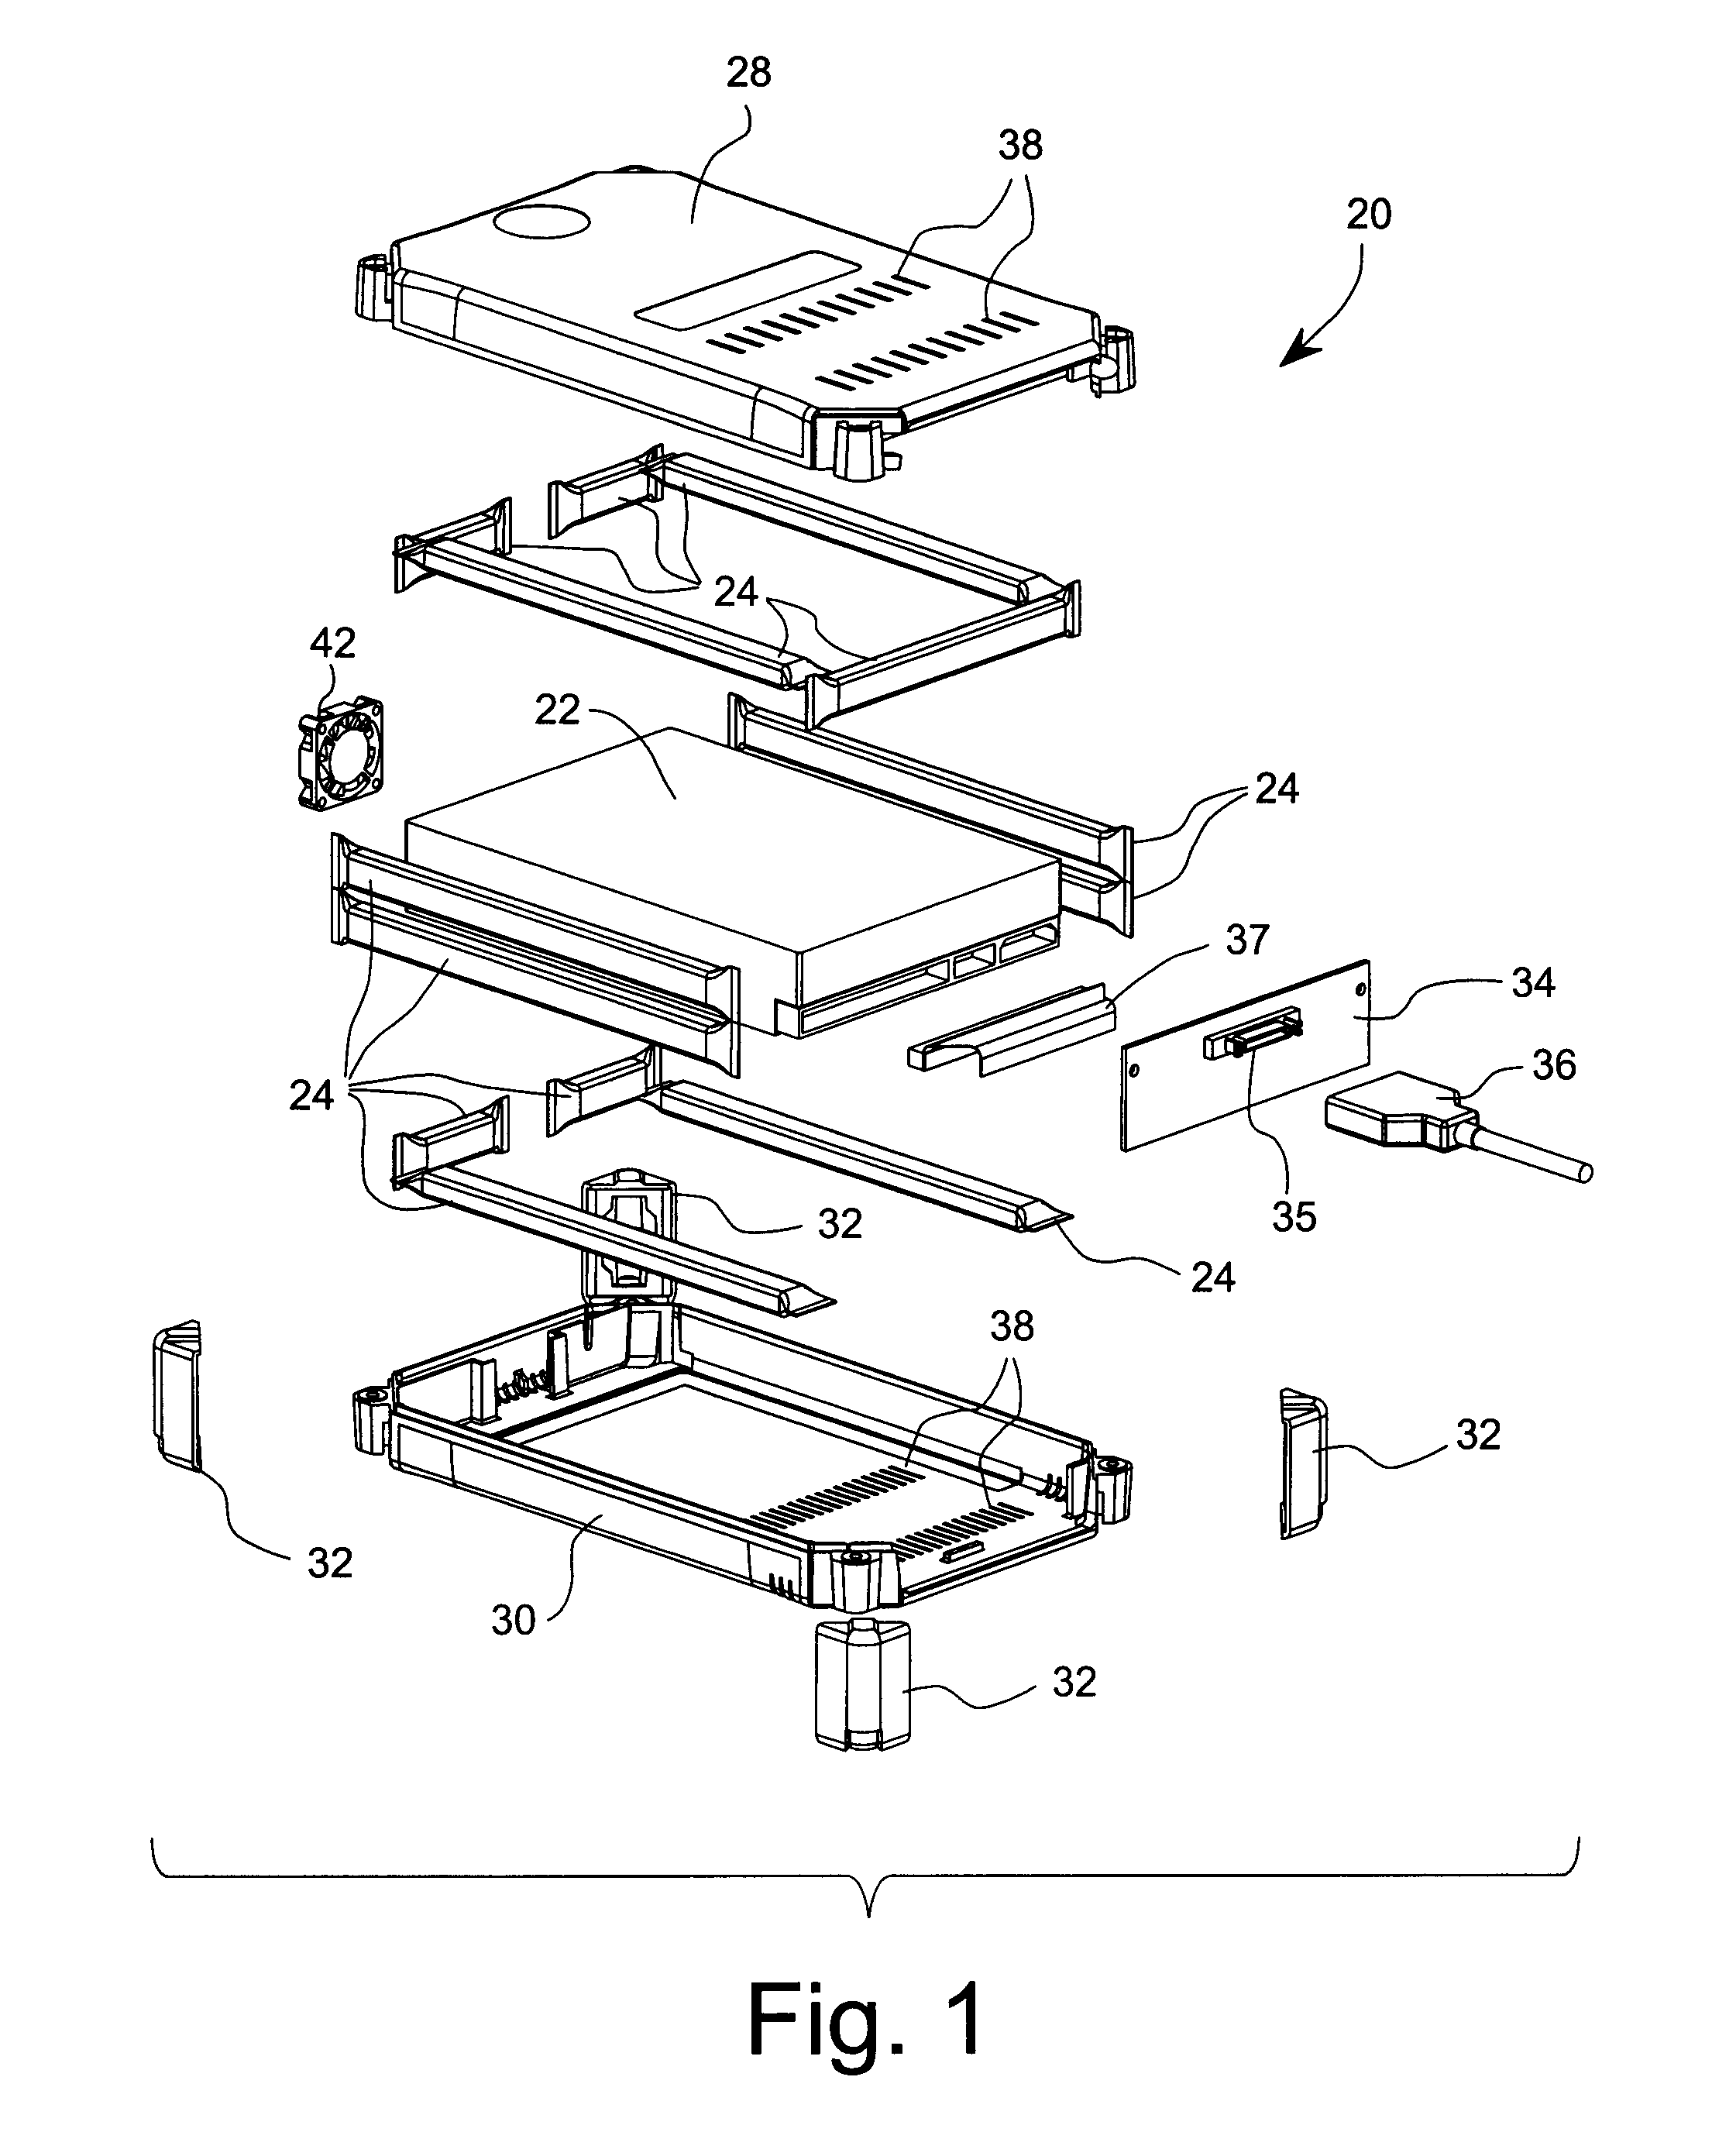 Energy dissipative device and method